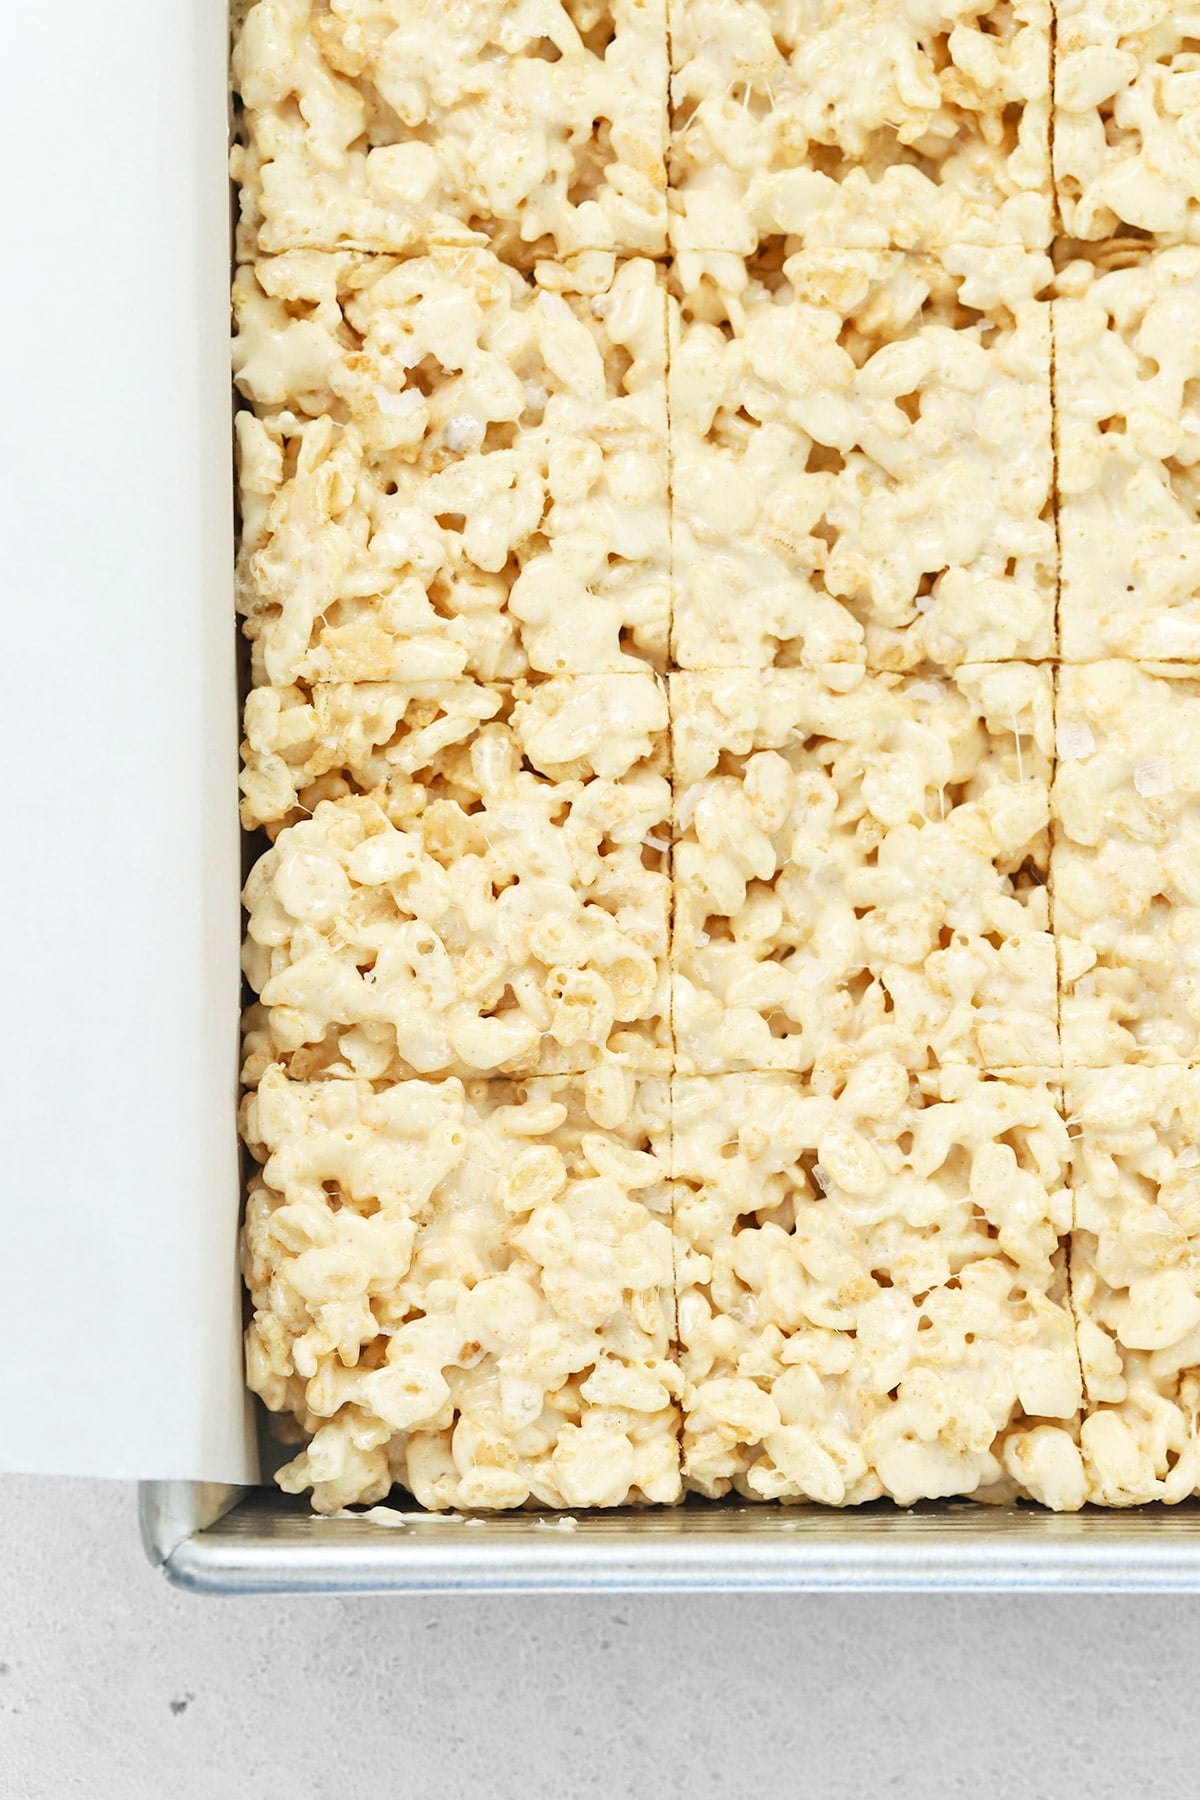 Gluten-free brown butter rice krispies treats cut into squares